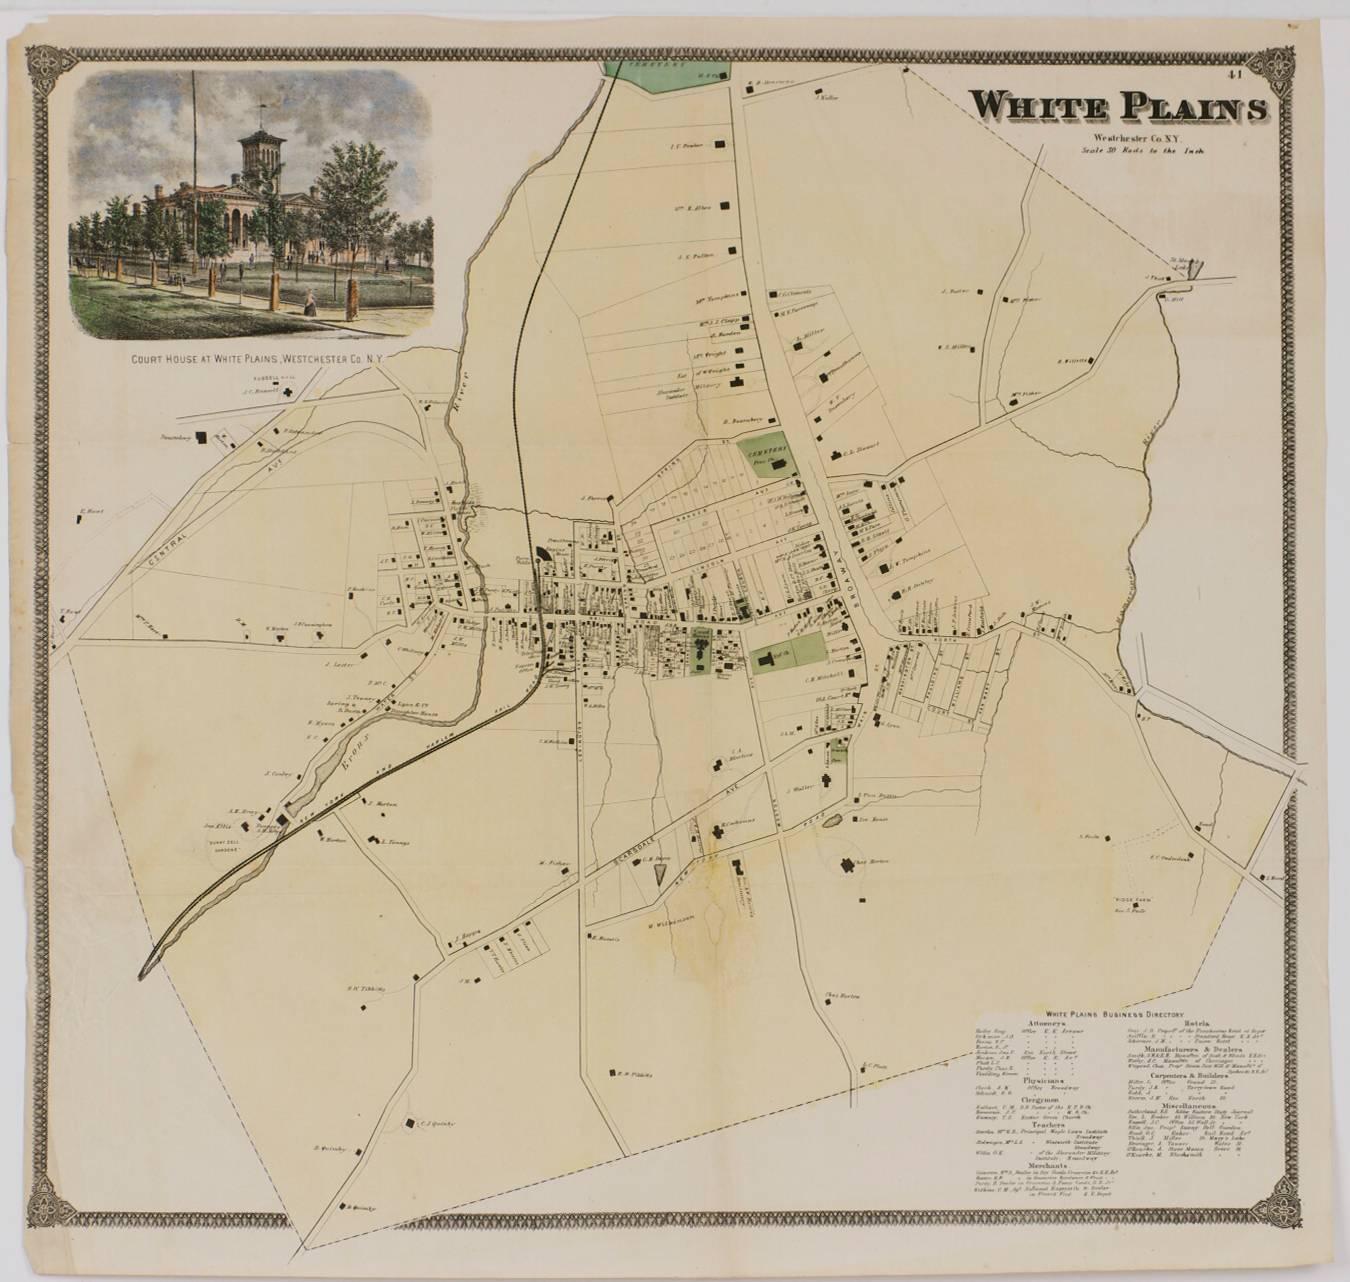 Unknown Landscape Print - Map of White Plains, New York